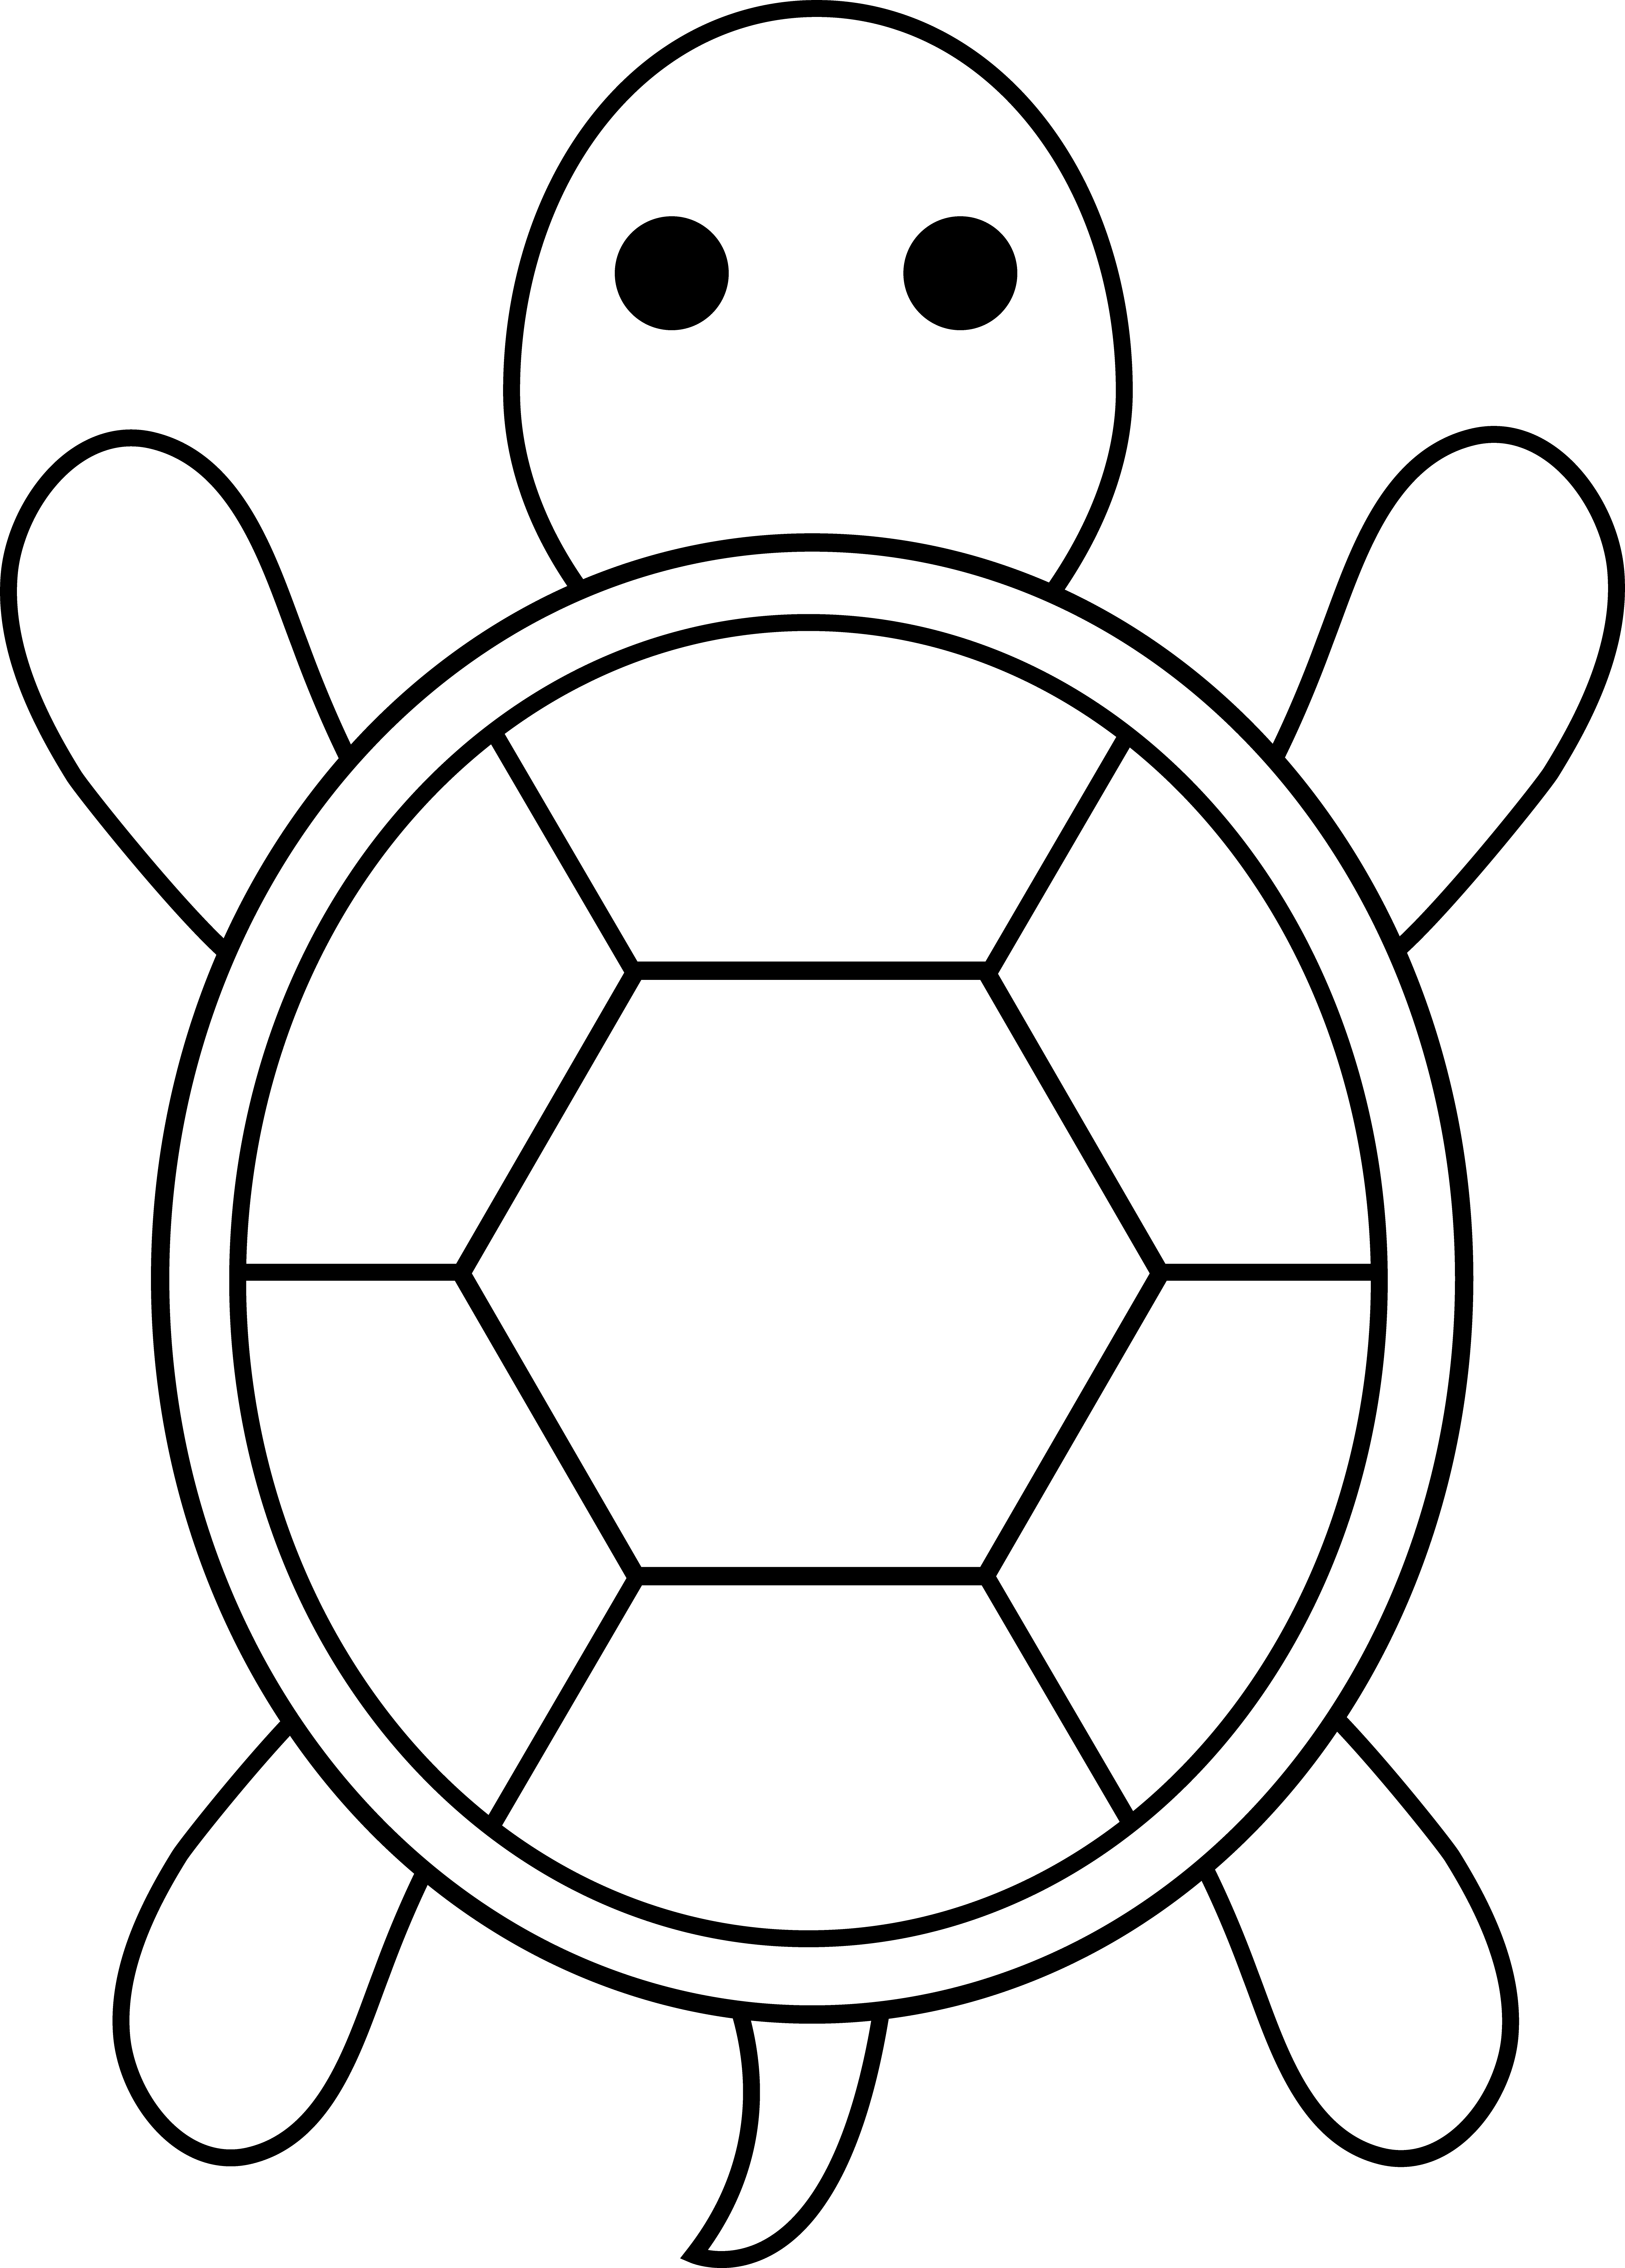 Turtle Images Free - Cliparts.co